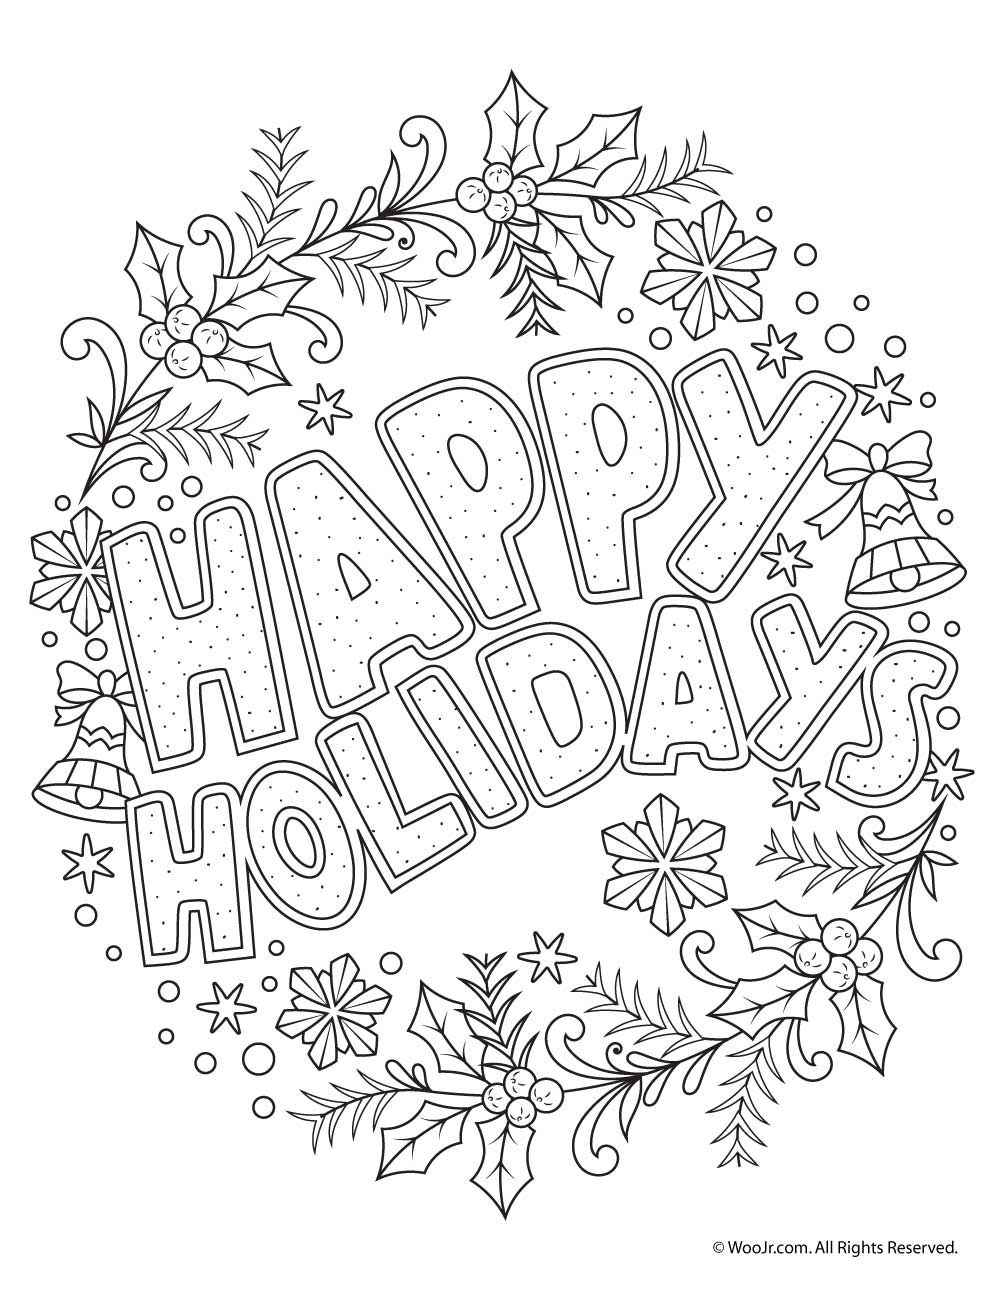 Beautiful Printable Christmas Adult Coloring Pages | Coloring Pages - Free Printable Christmas Coloring Pages